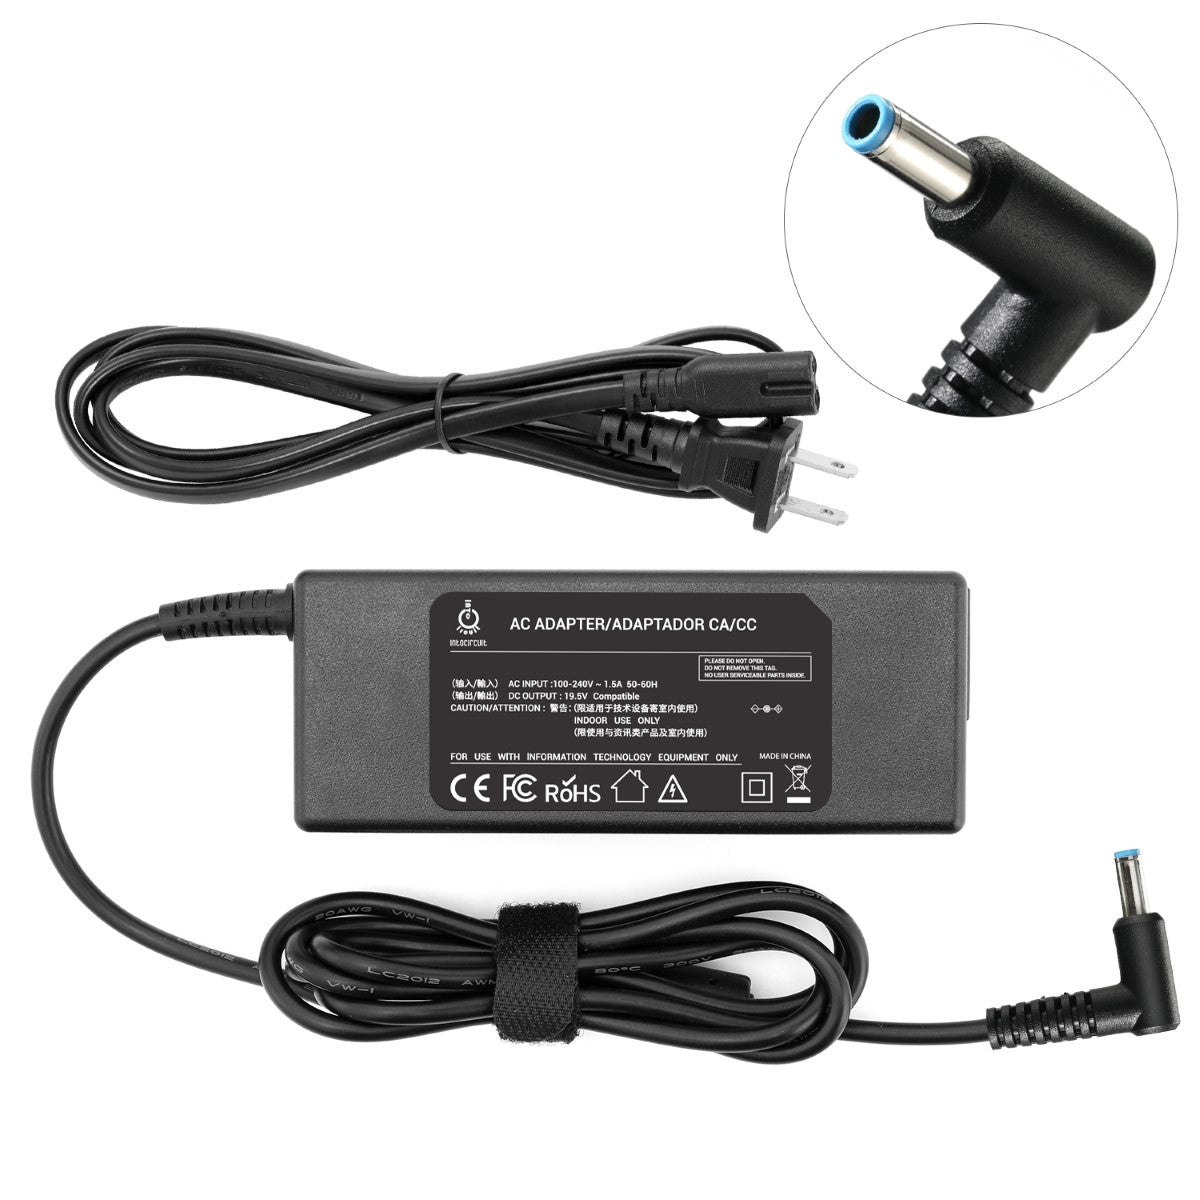 Charger for HP Pavilion 17-g121ds Laptop